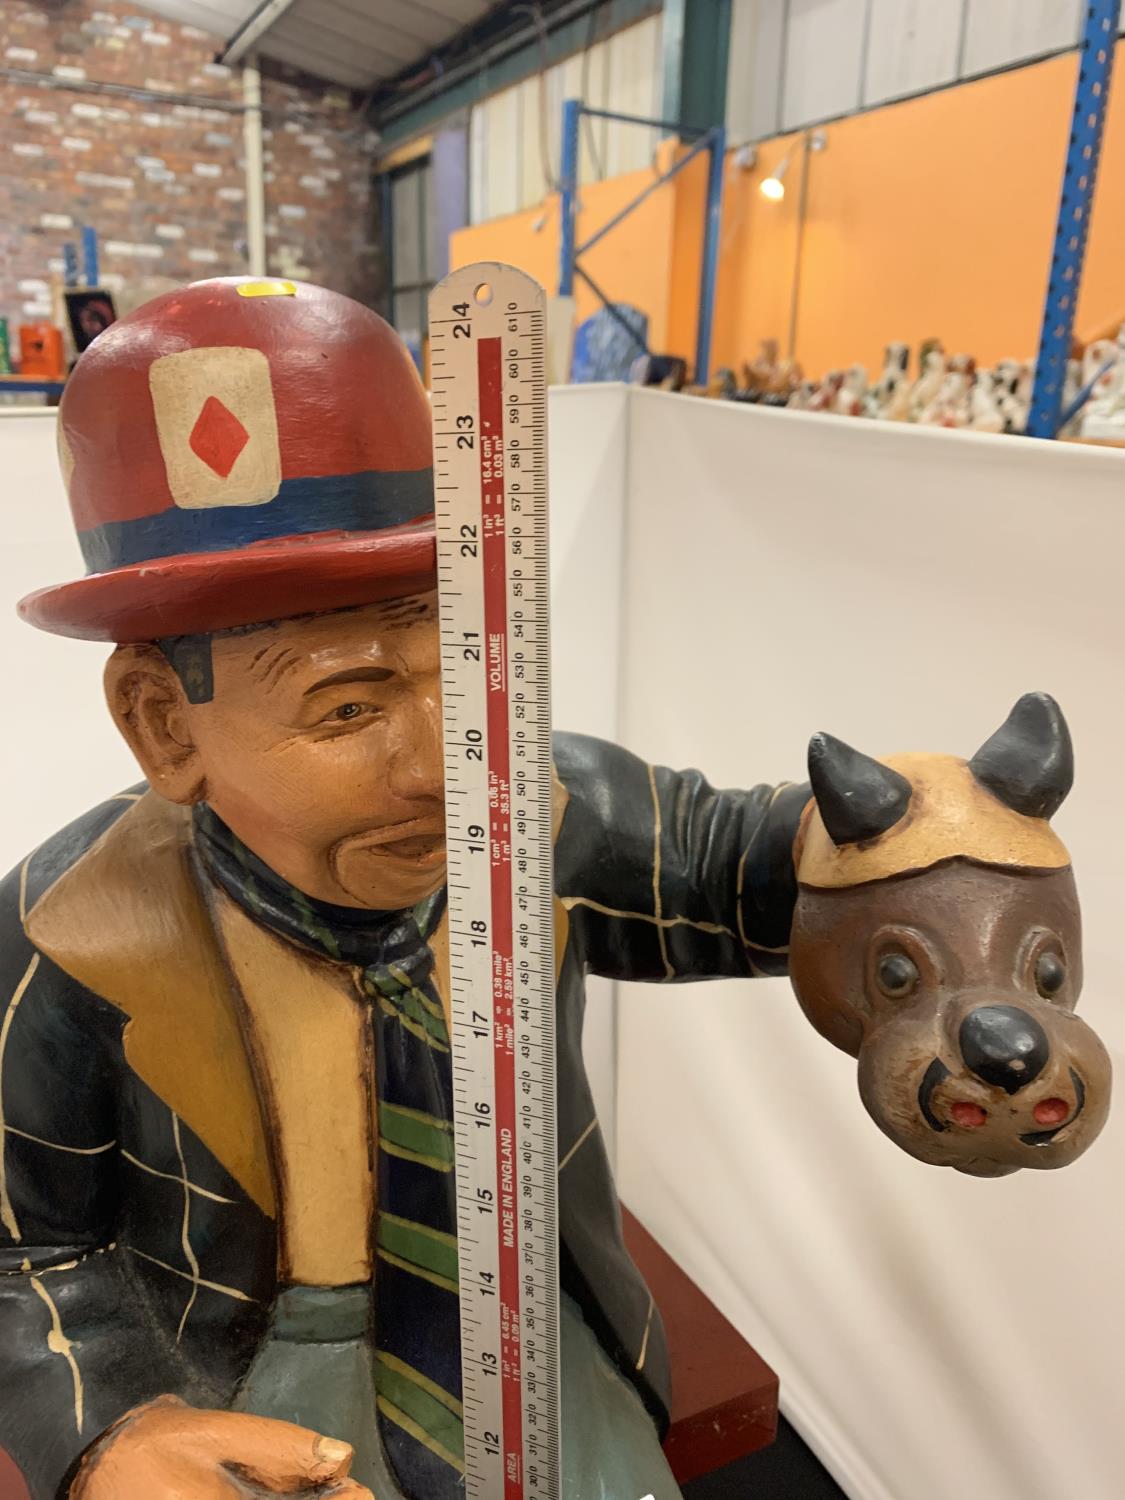 A LARGE RESIN CHARACTER ORNAMENT FEATURING A VENTRILOQUIST IN A BOWLER HAT SEATED ON A WOODEN BENCH - Image 3 of 3